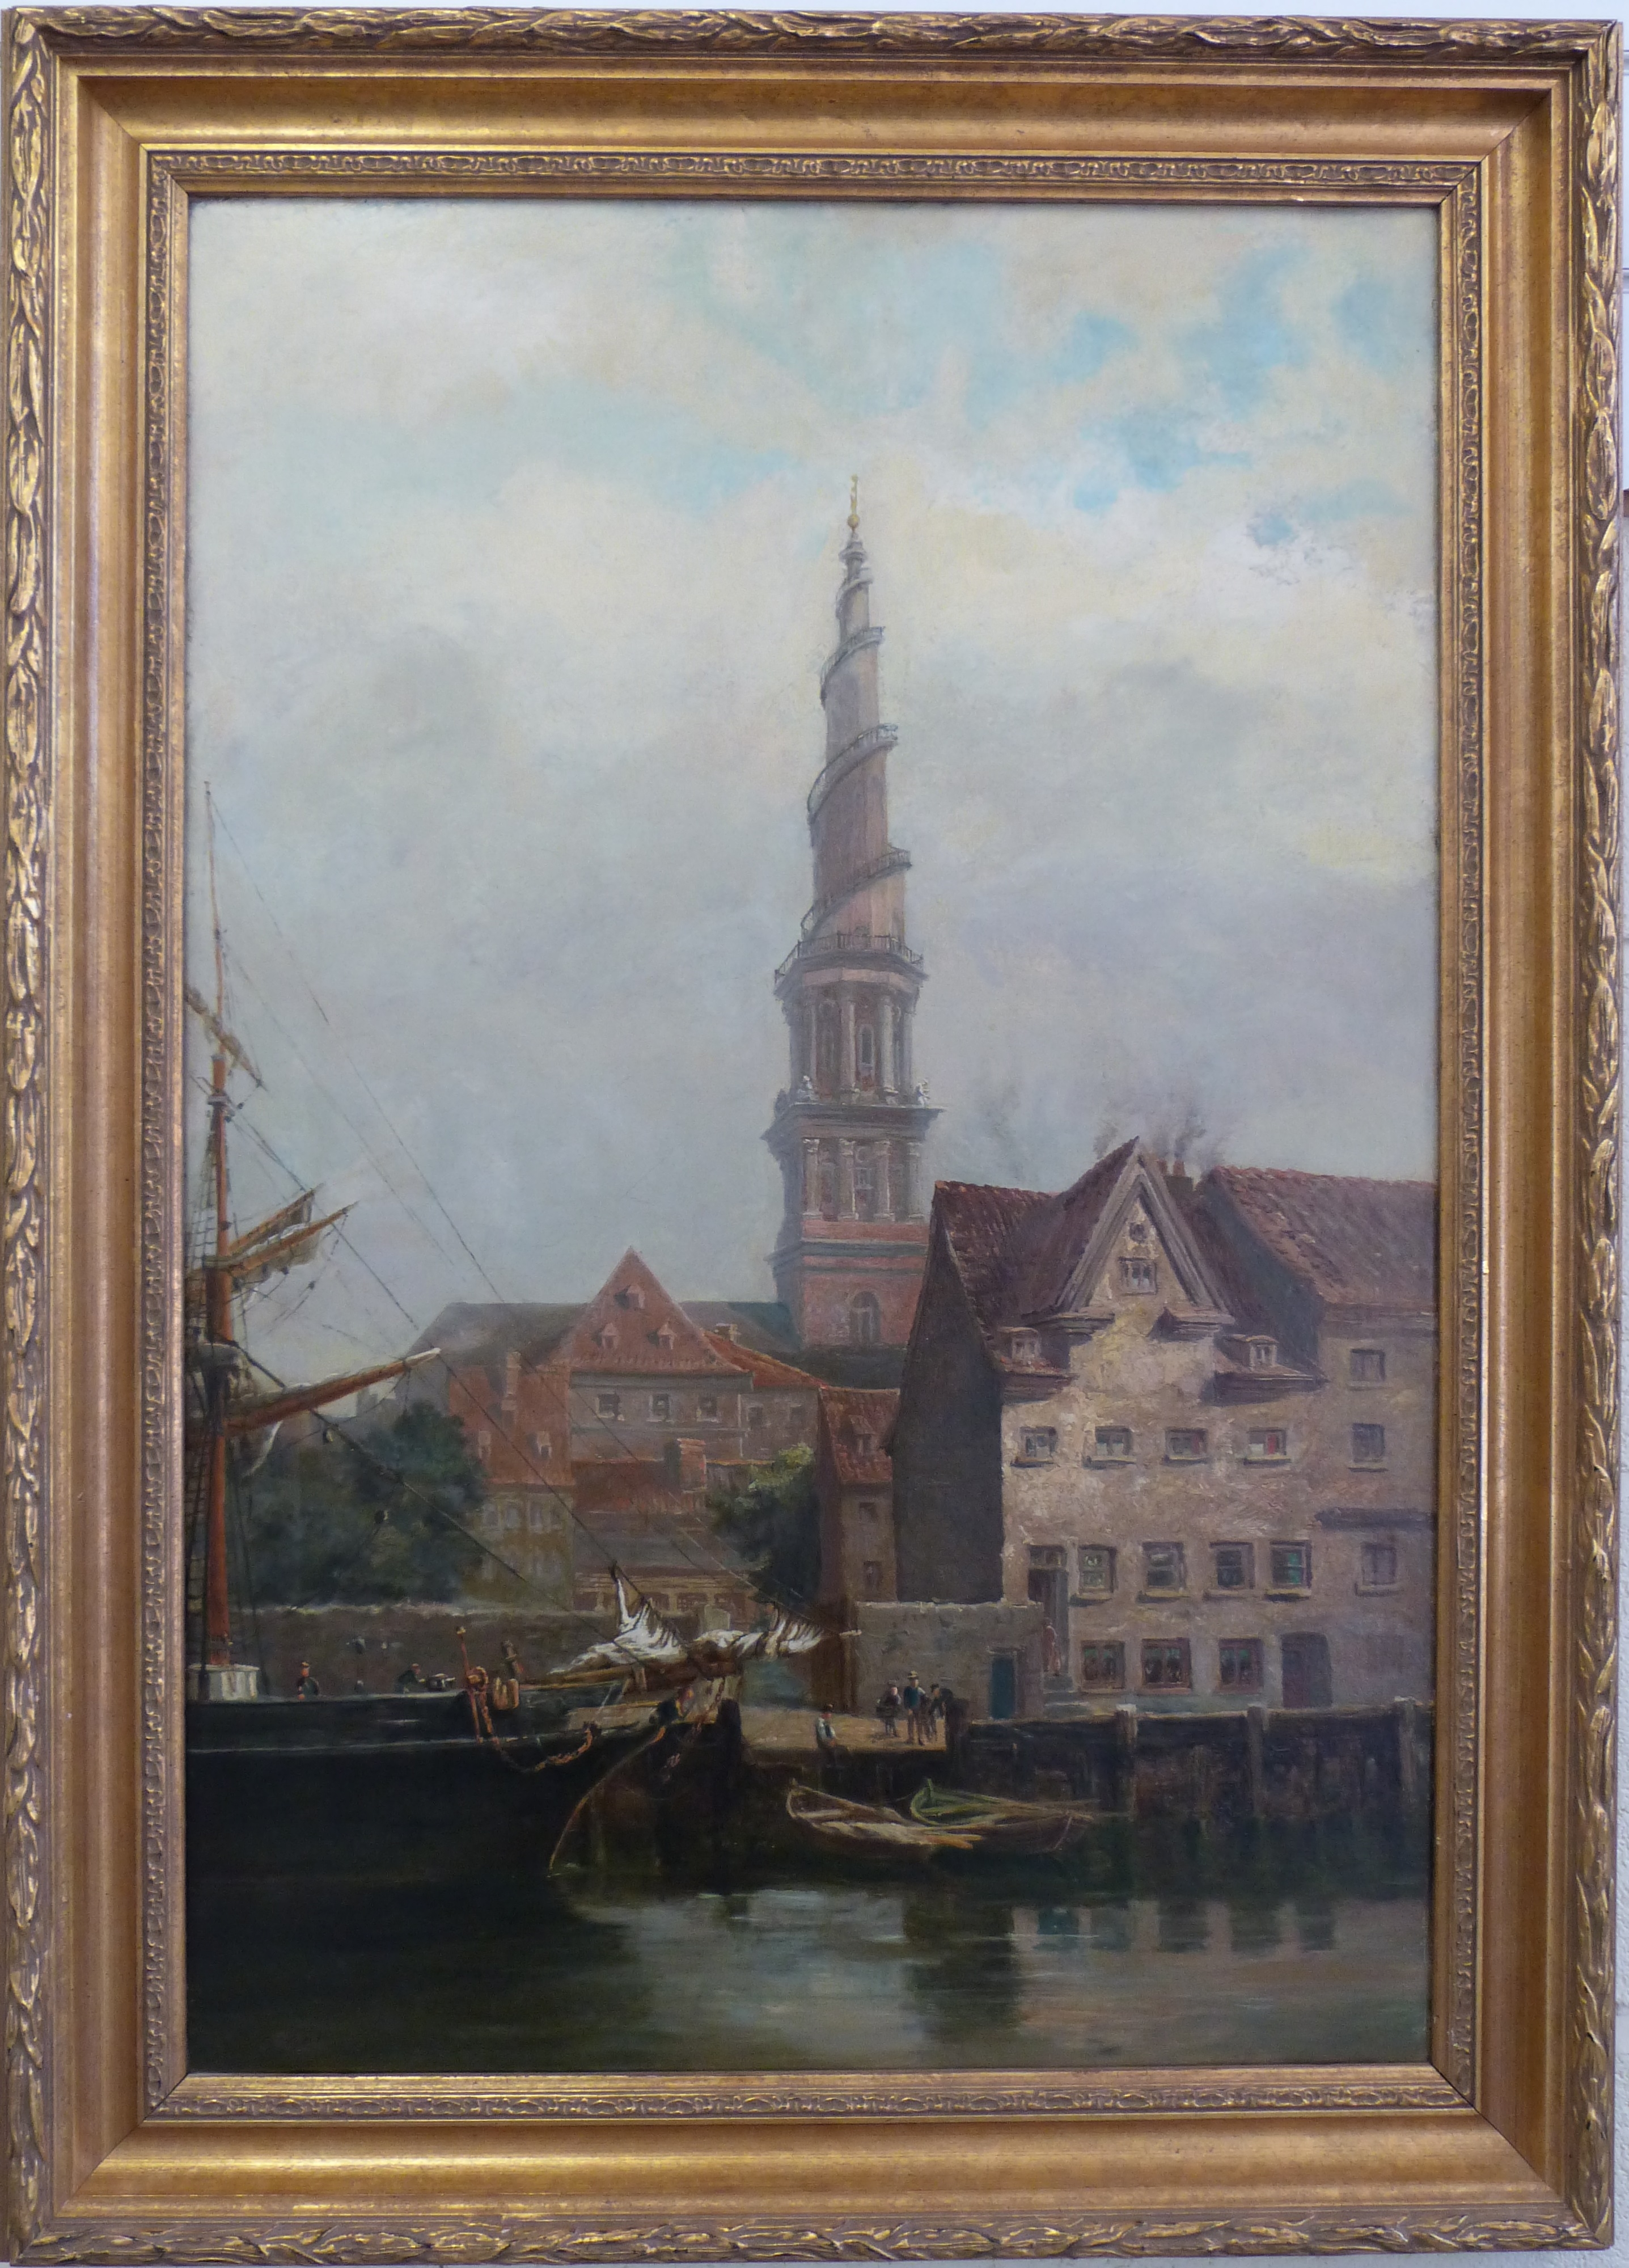 Framed 19thC school oil on canvas of a quayside scene, possibly Dutch, signature indistinct. - Image 2 of 3